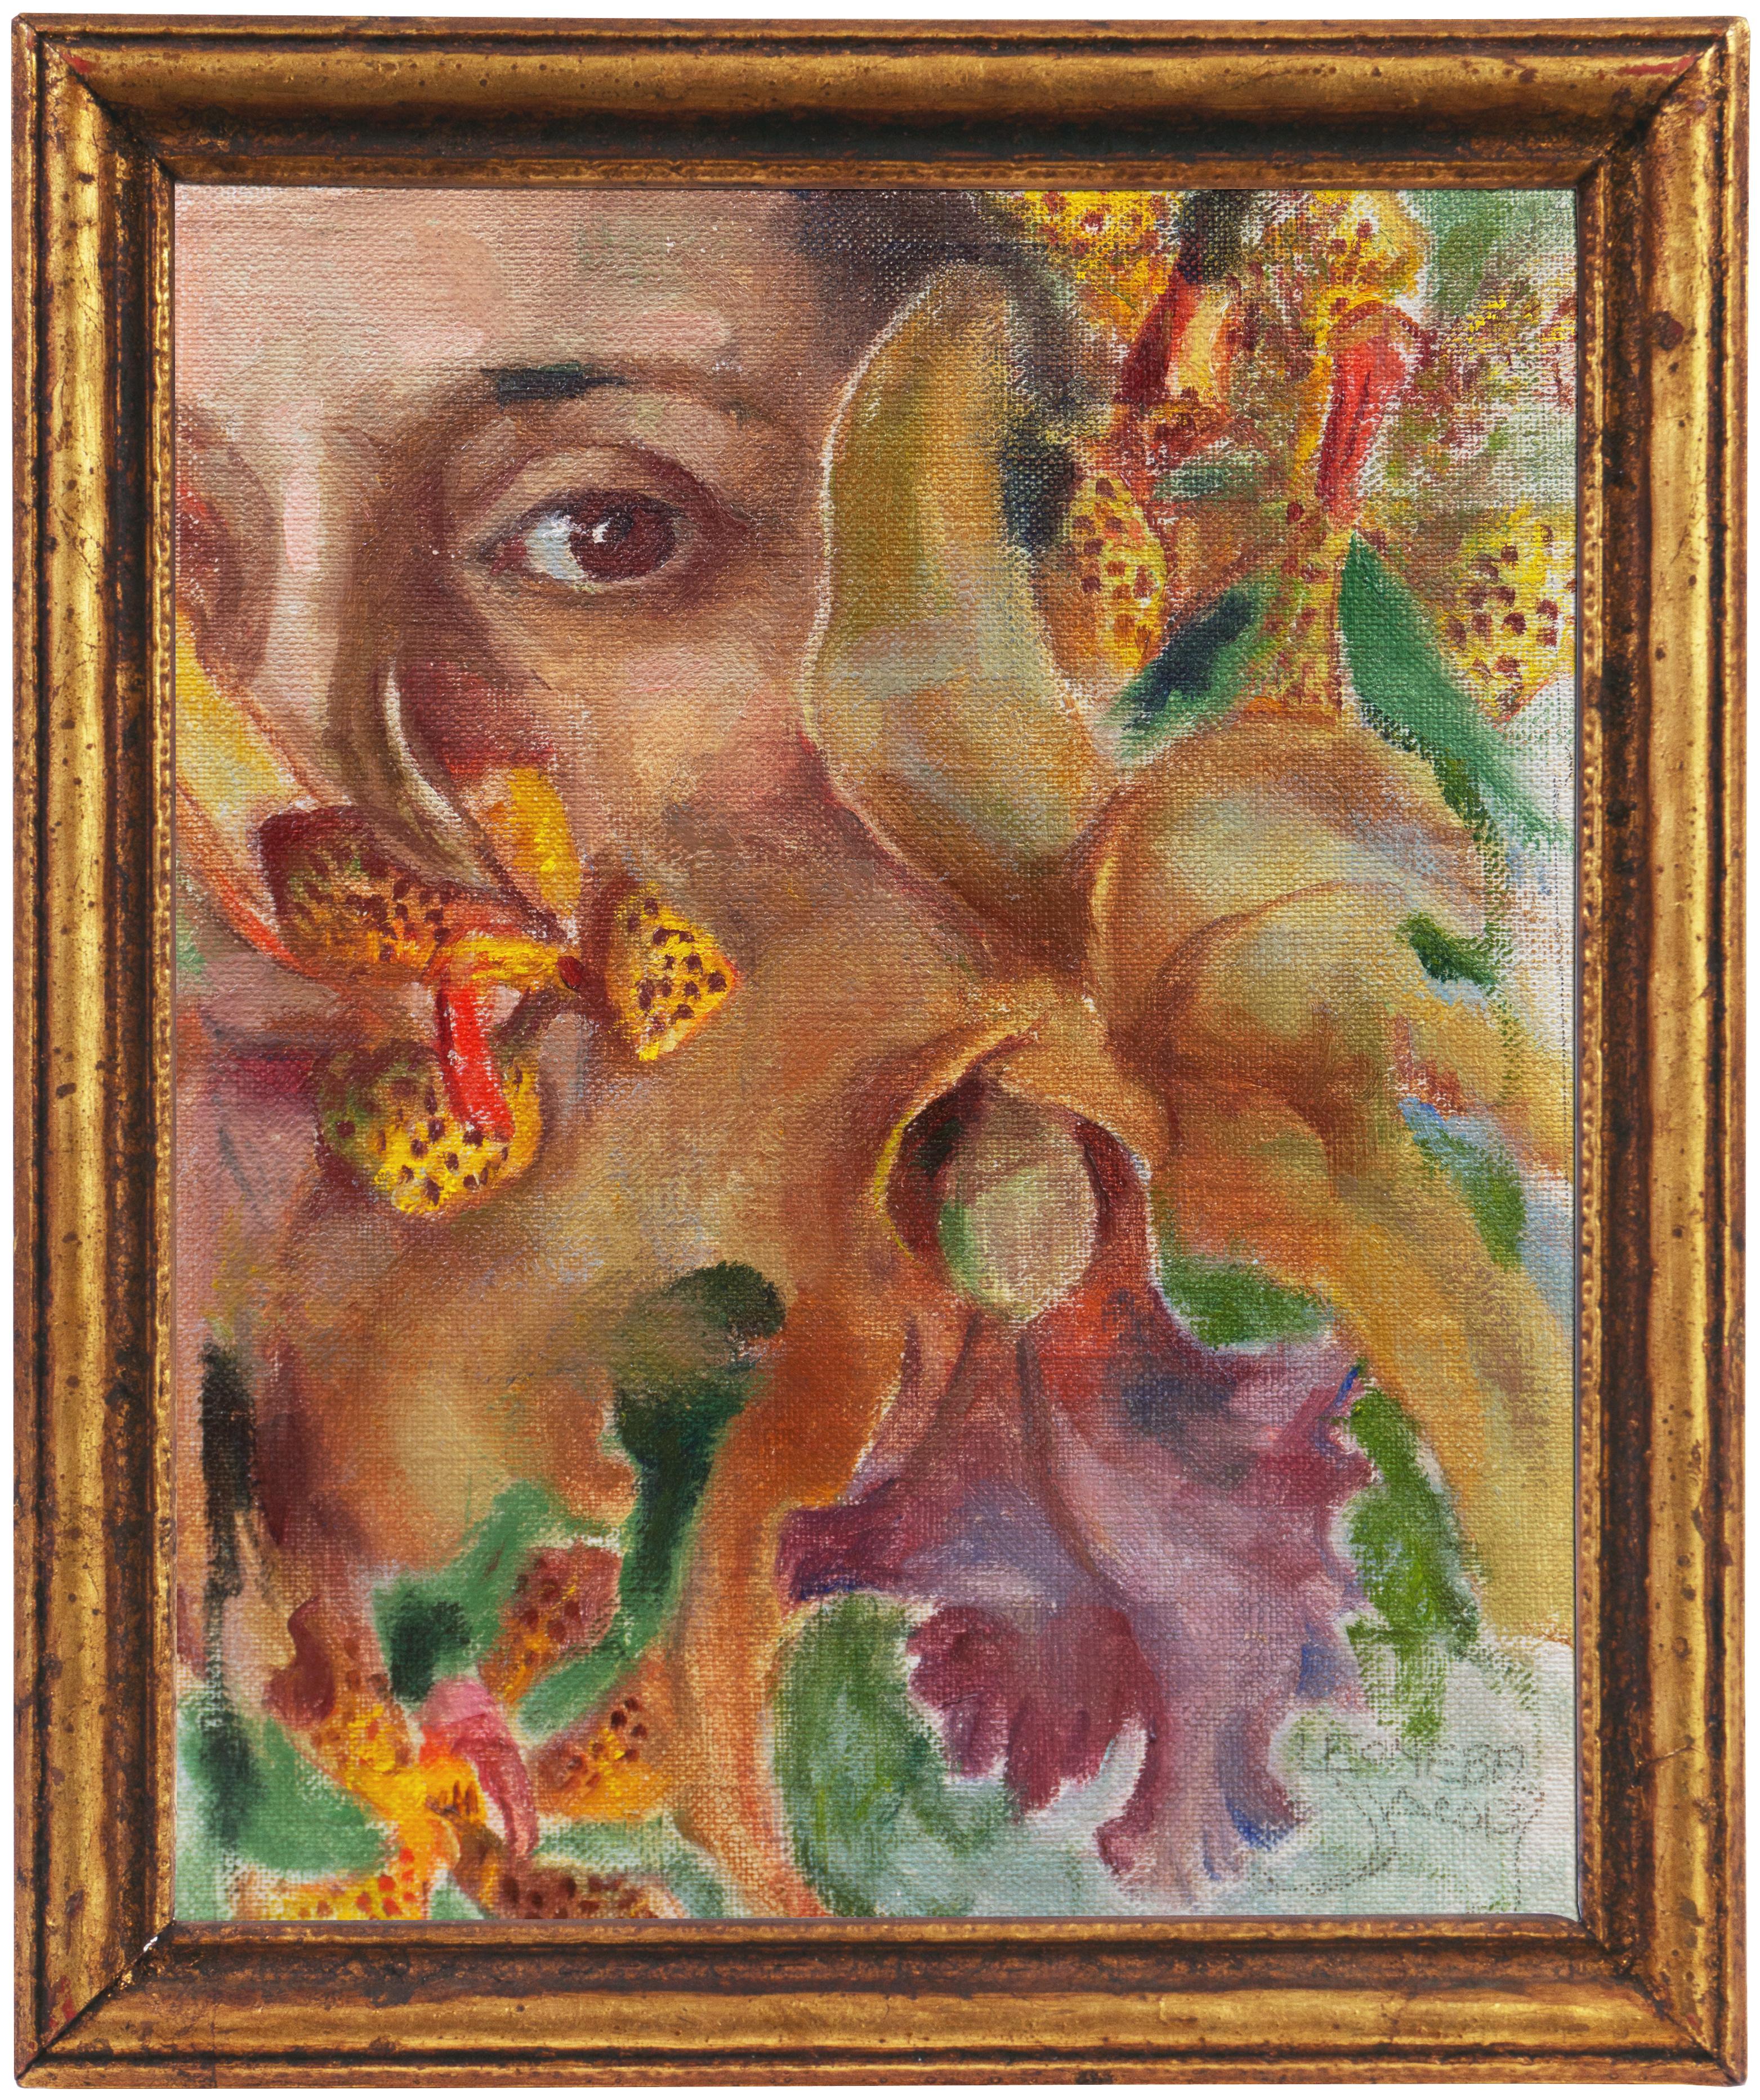 'Self Portrait with Orchids', National Association of Women Artists, AWS - Painting by Leonebel Jacobs